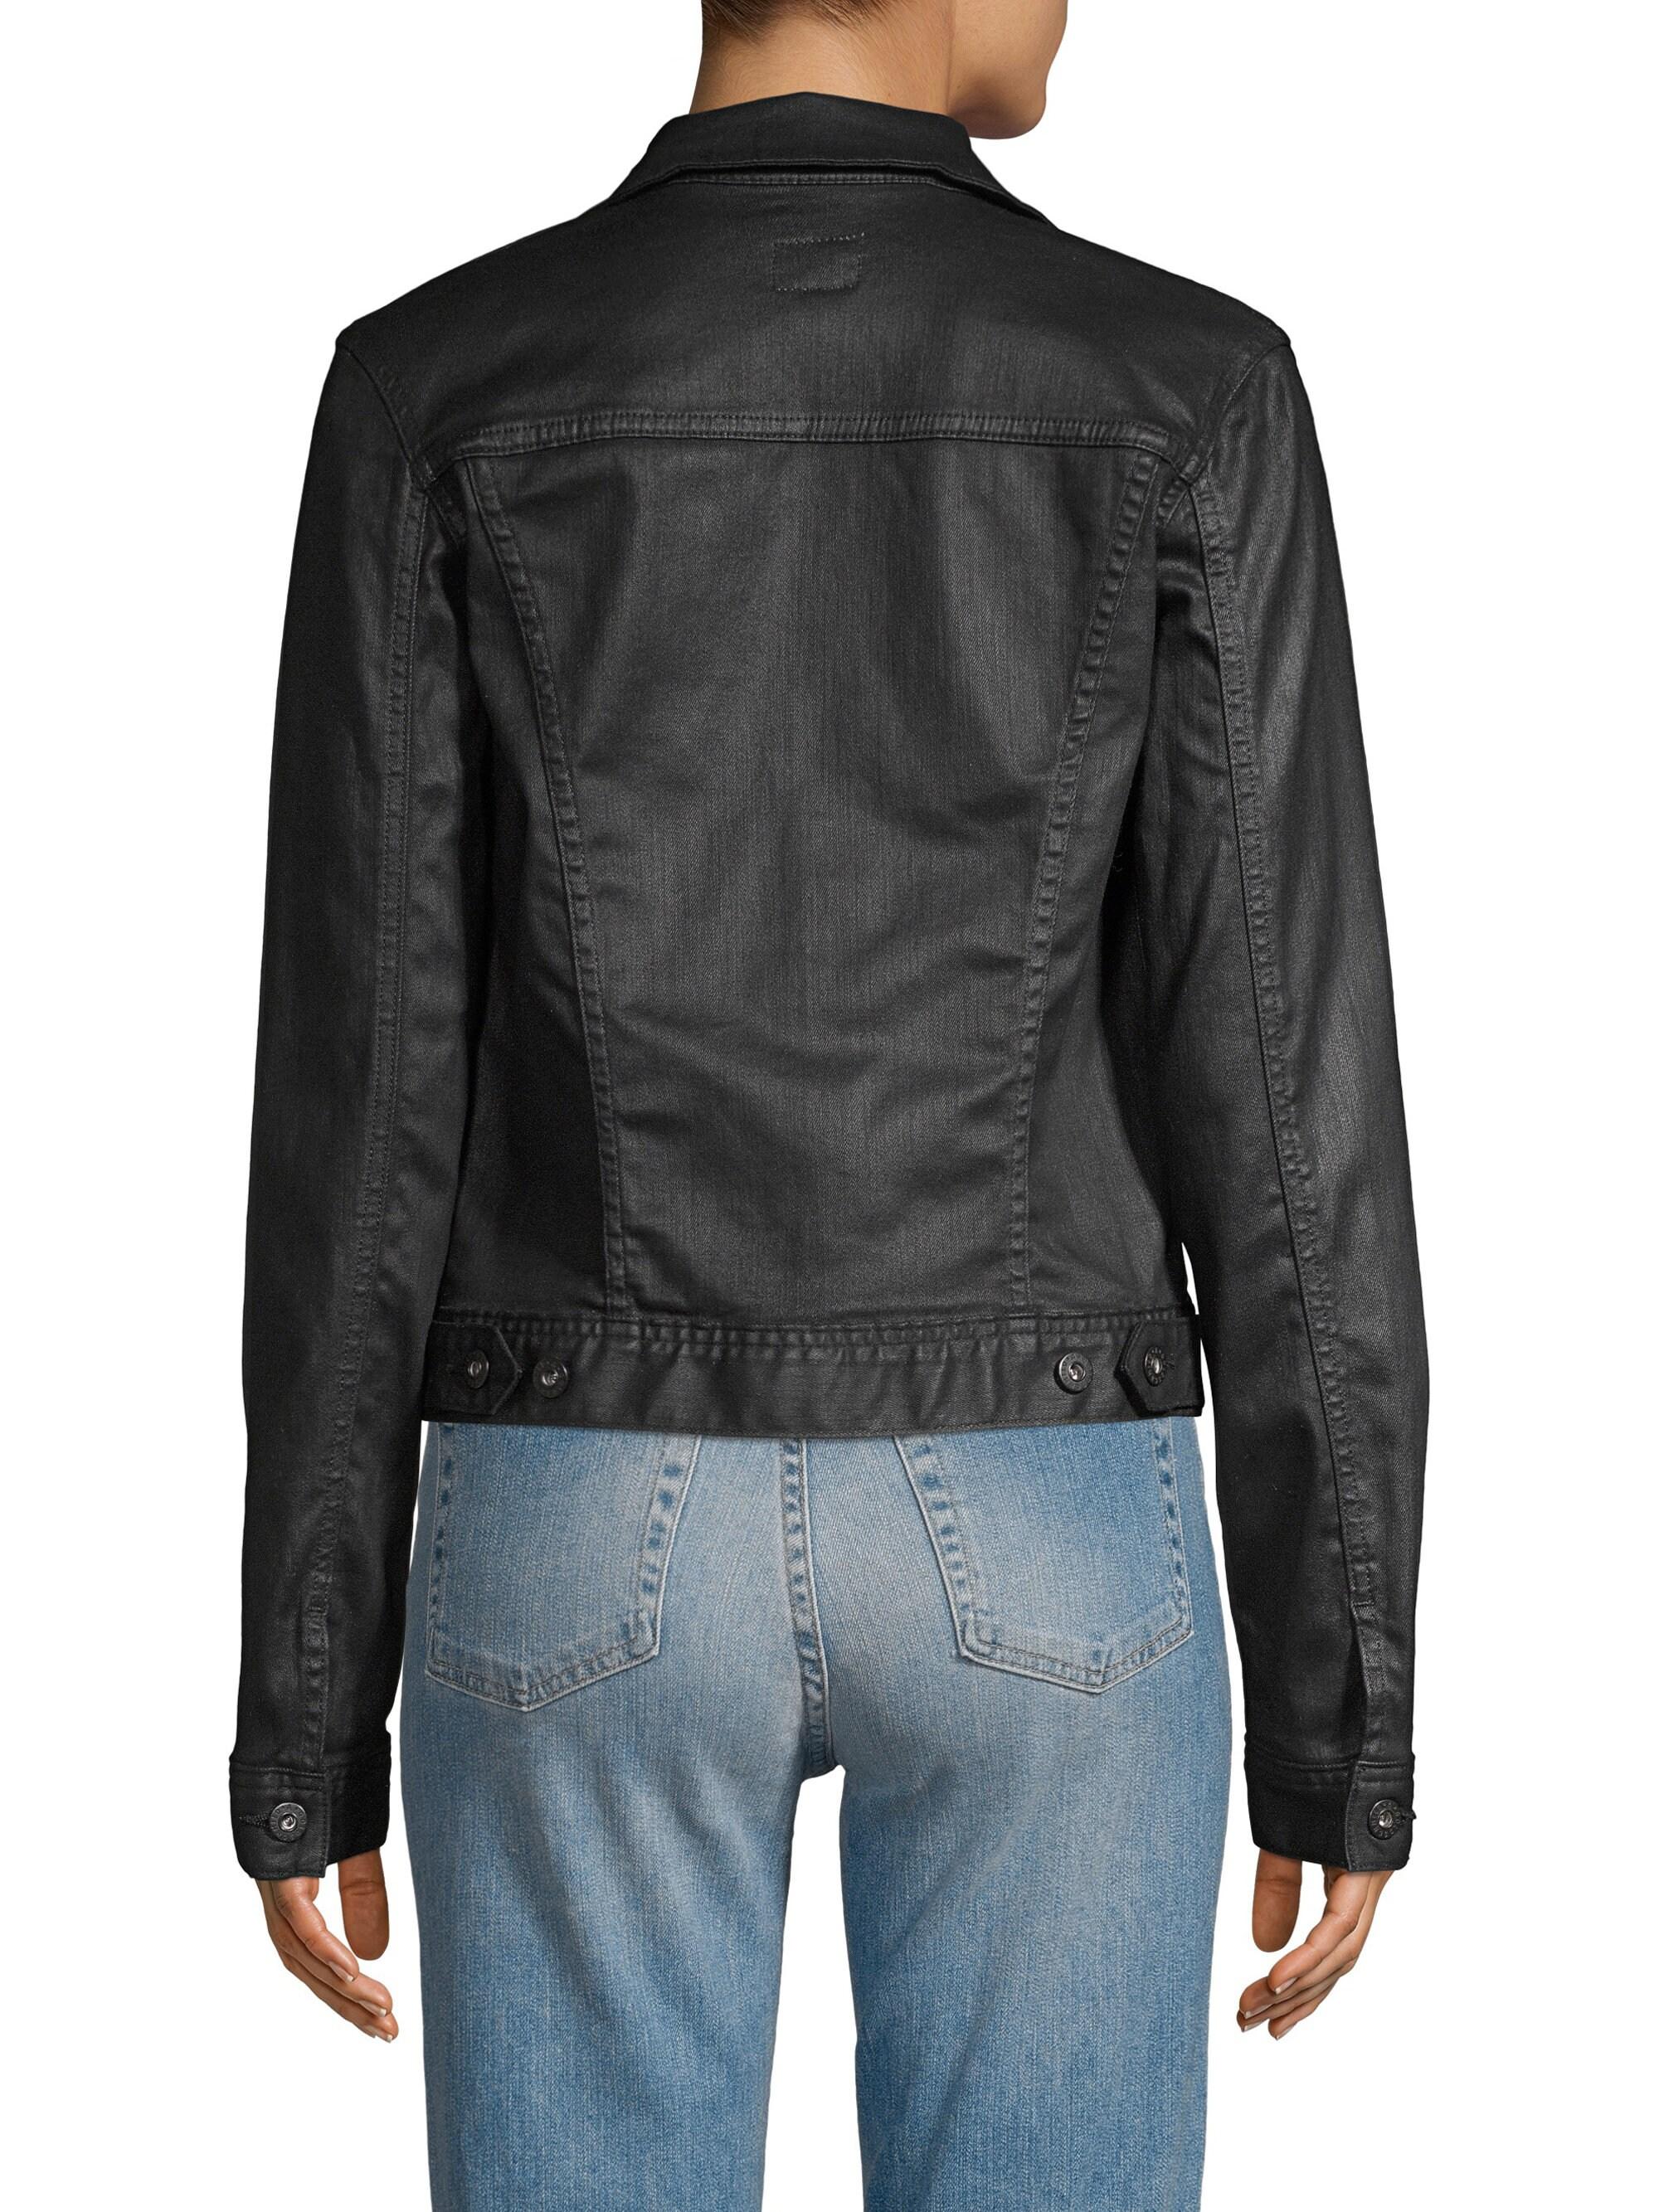 AG Jeans Cotton Robyn Coated Jean Jacket in Black - Lyst